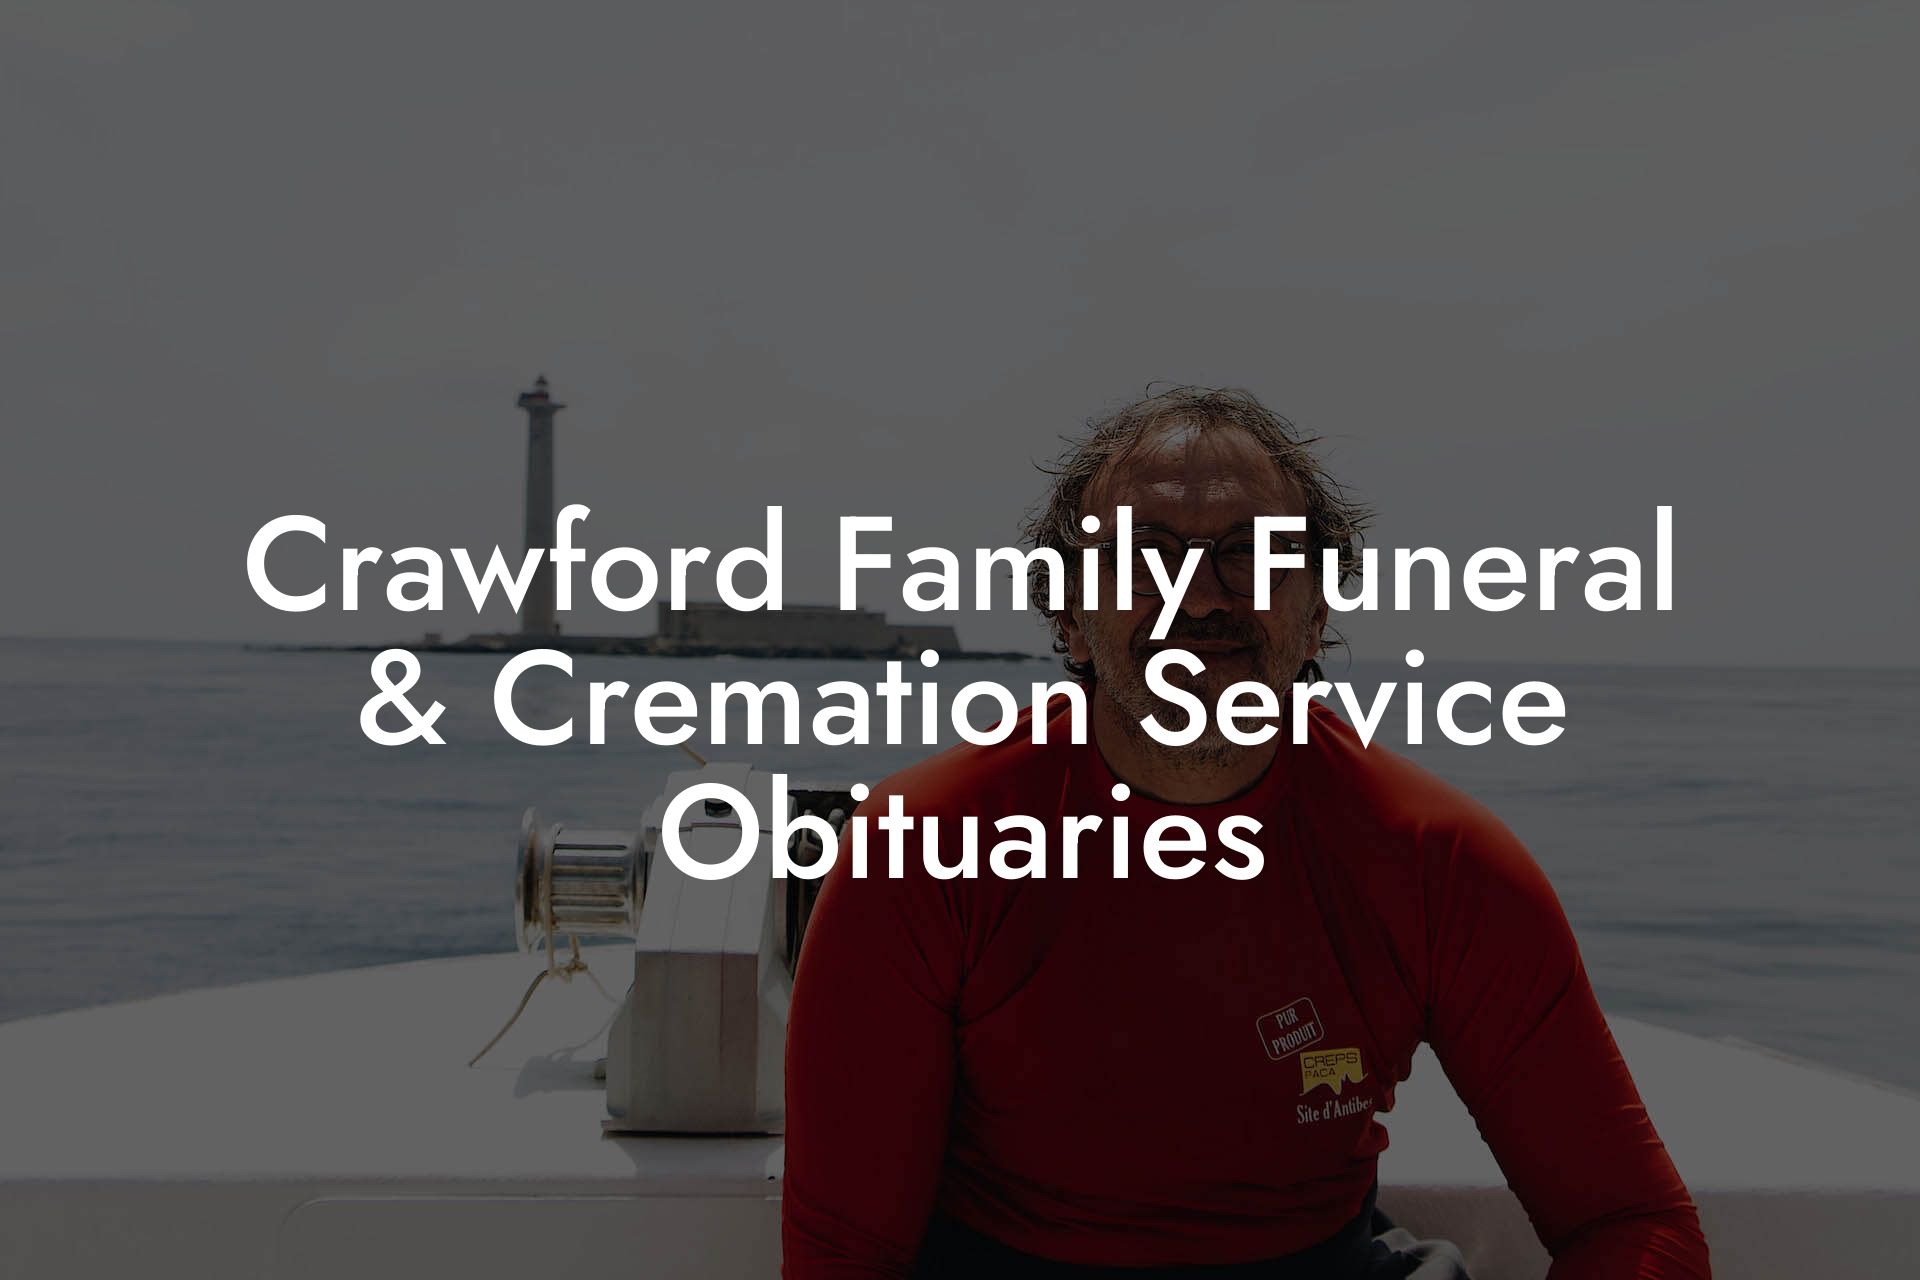 Crawford Family Funeral & Cremation Service Obituaries